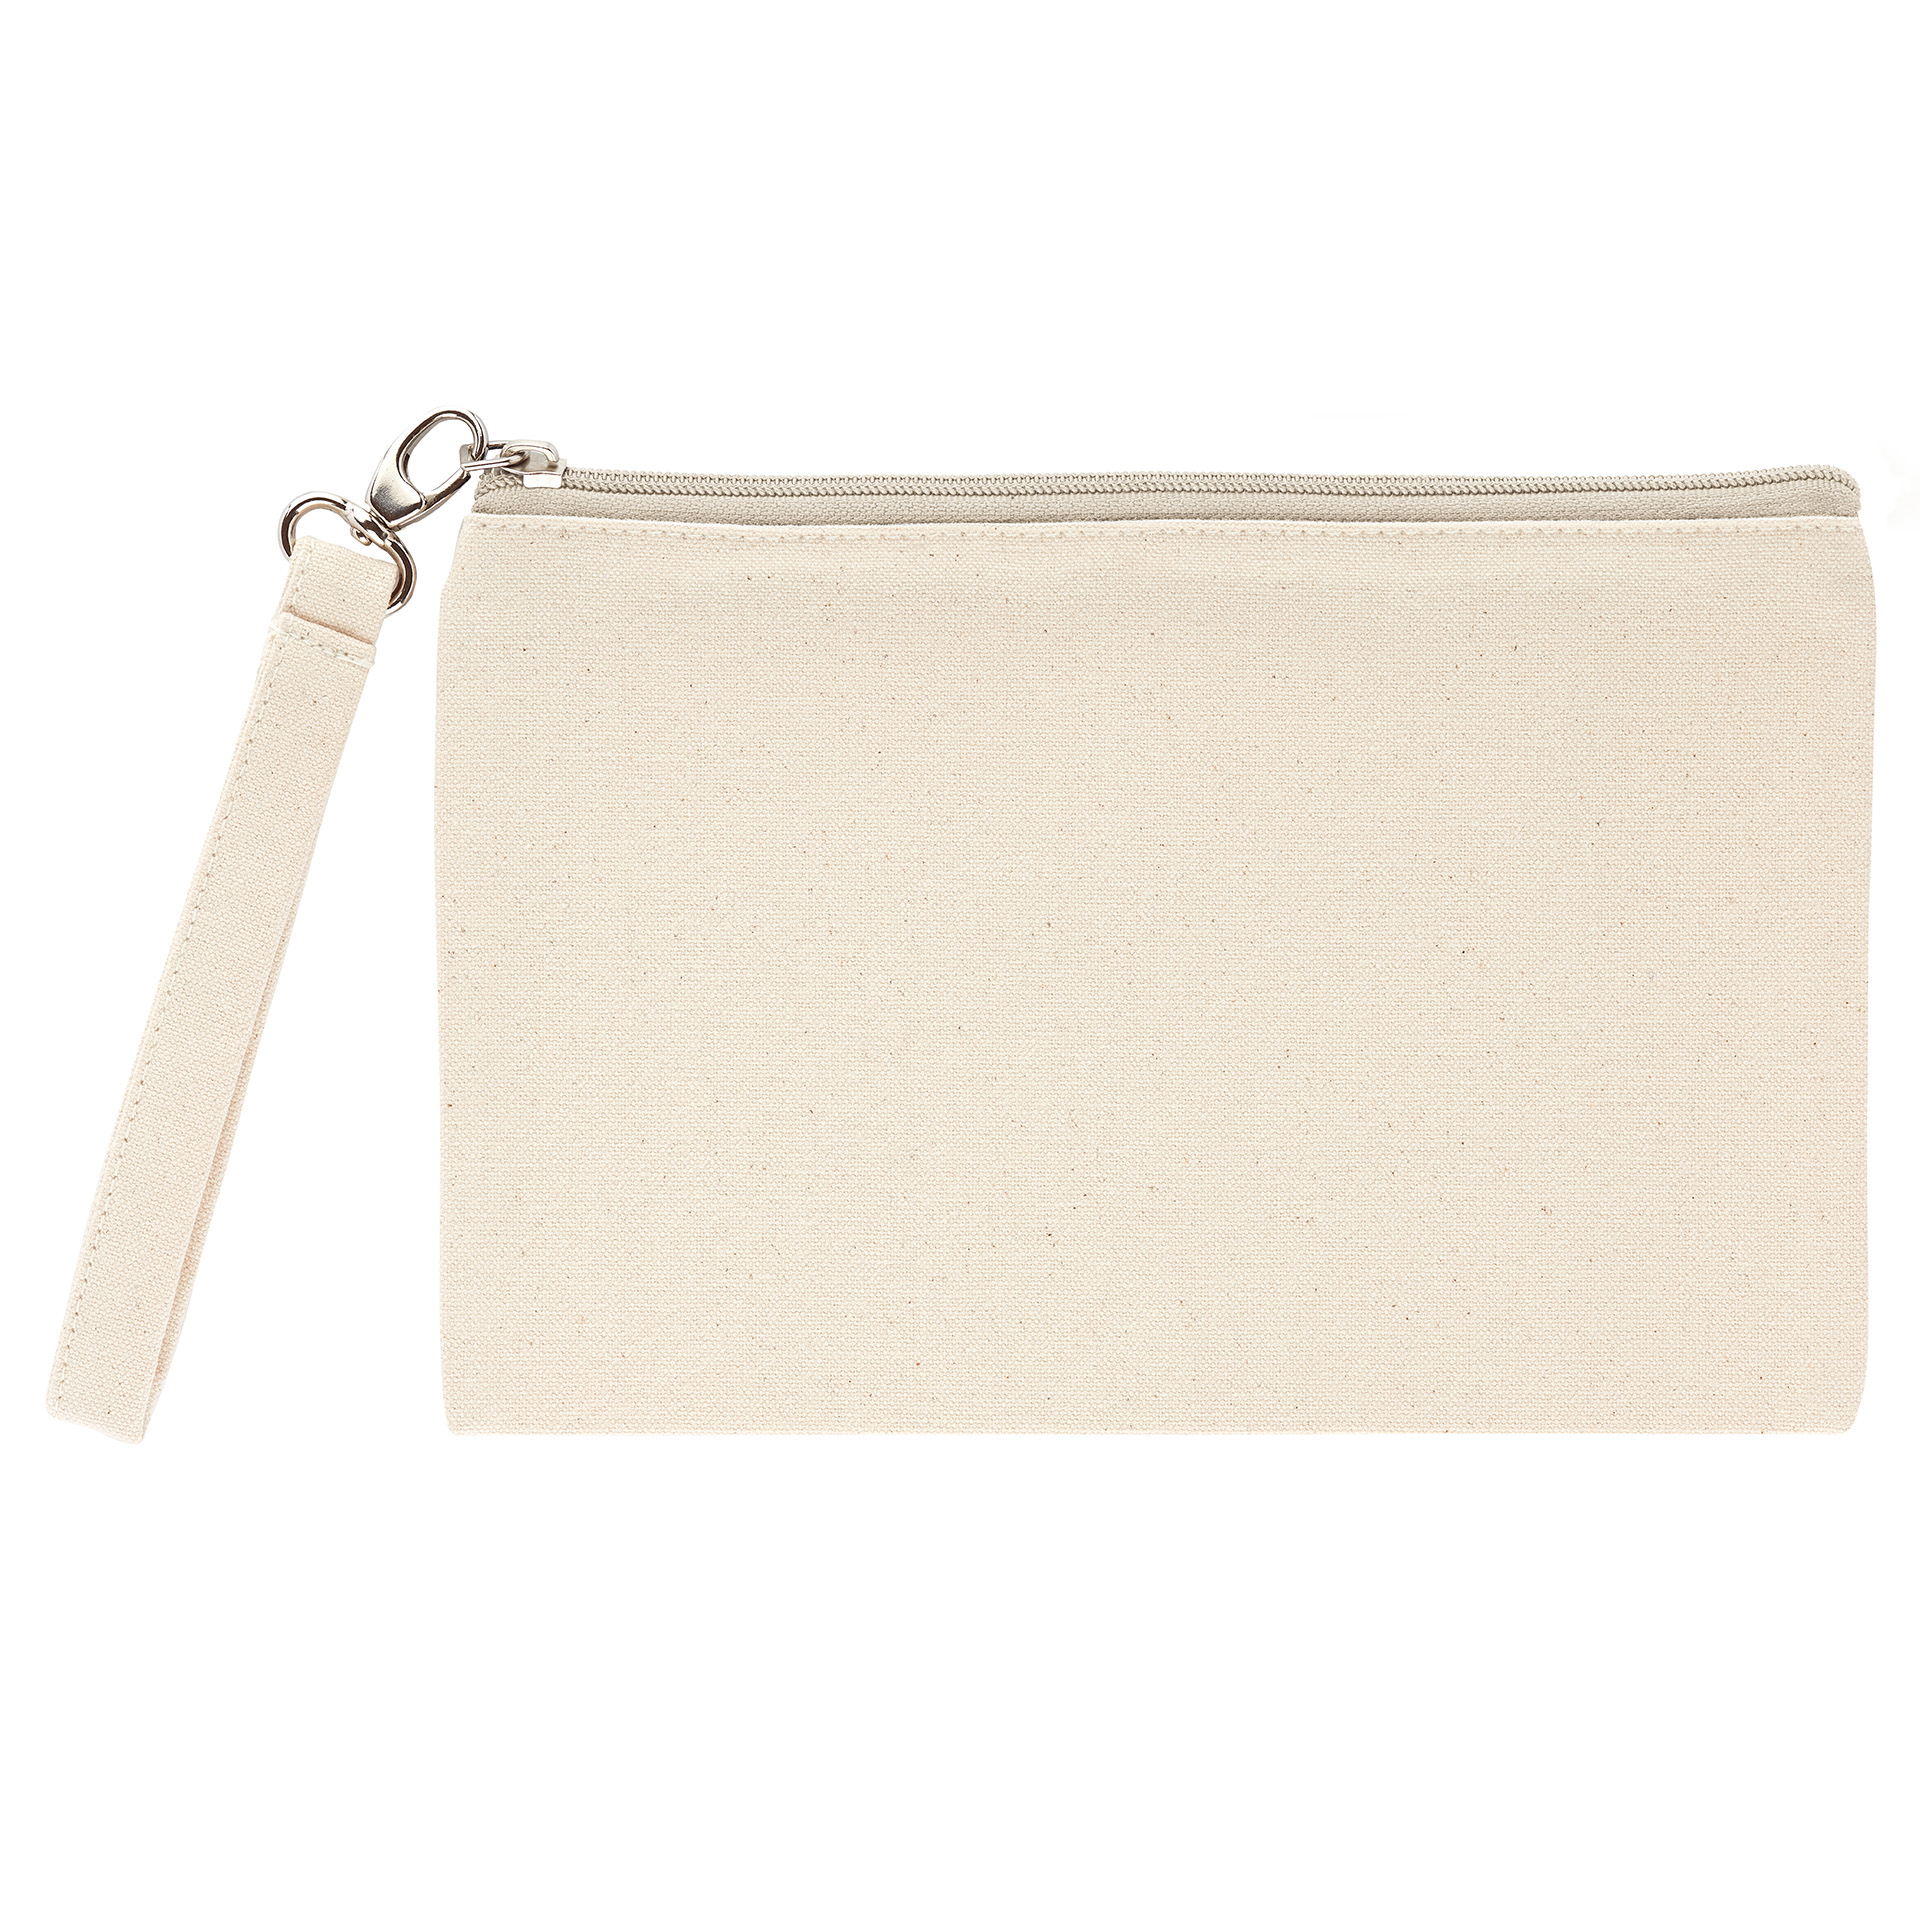 The Green & Good Ascot Cosmetics Pouch is made from Fairtrade & Organic cotton canvas which is natural and unbleached. Practical and chic, it comes with 3 different zip options (natural, black or navy). Quality chrome clip and detachable cotton handle. Ethically produced in India in an audited factory. 10oz / 280gsm Fairtrade & Organic cotton.